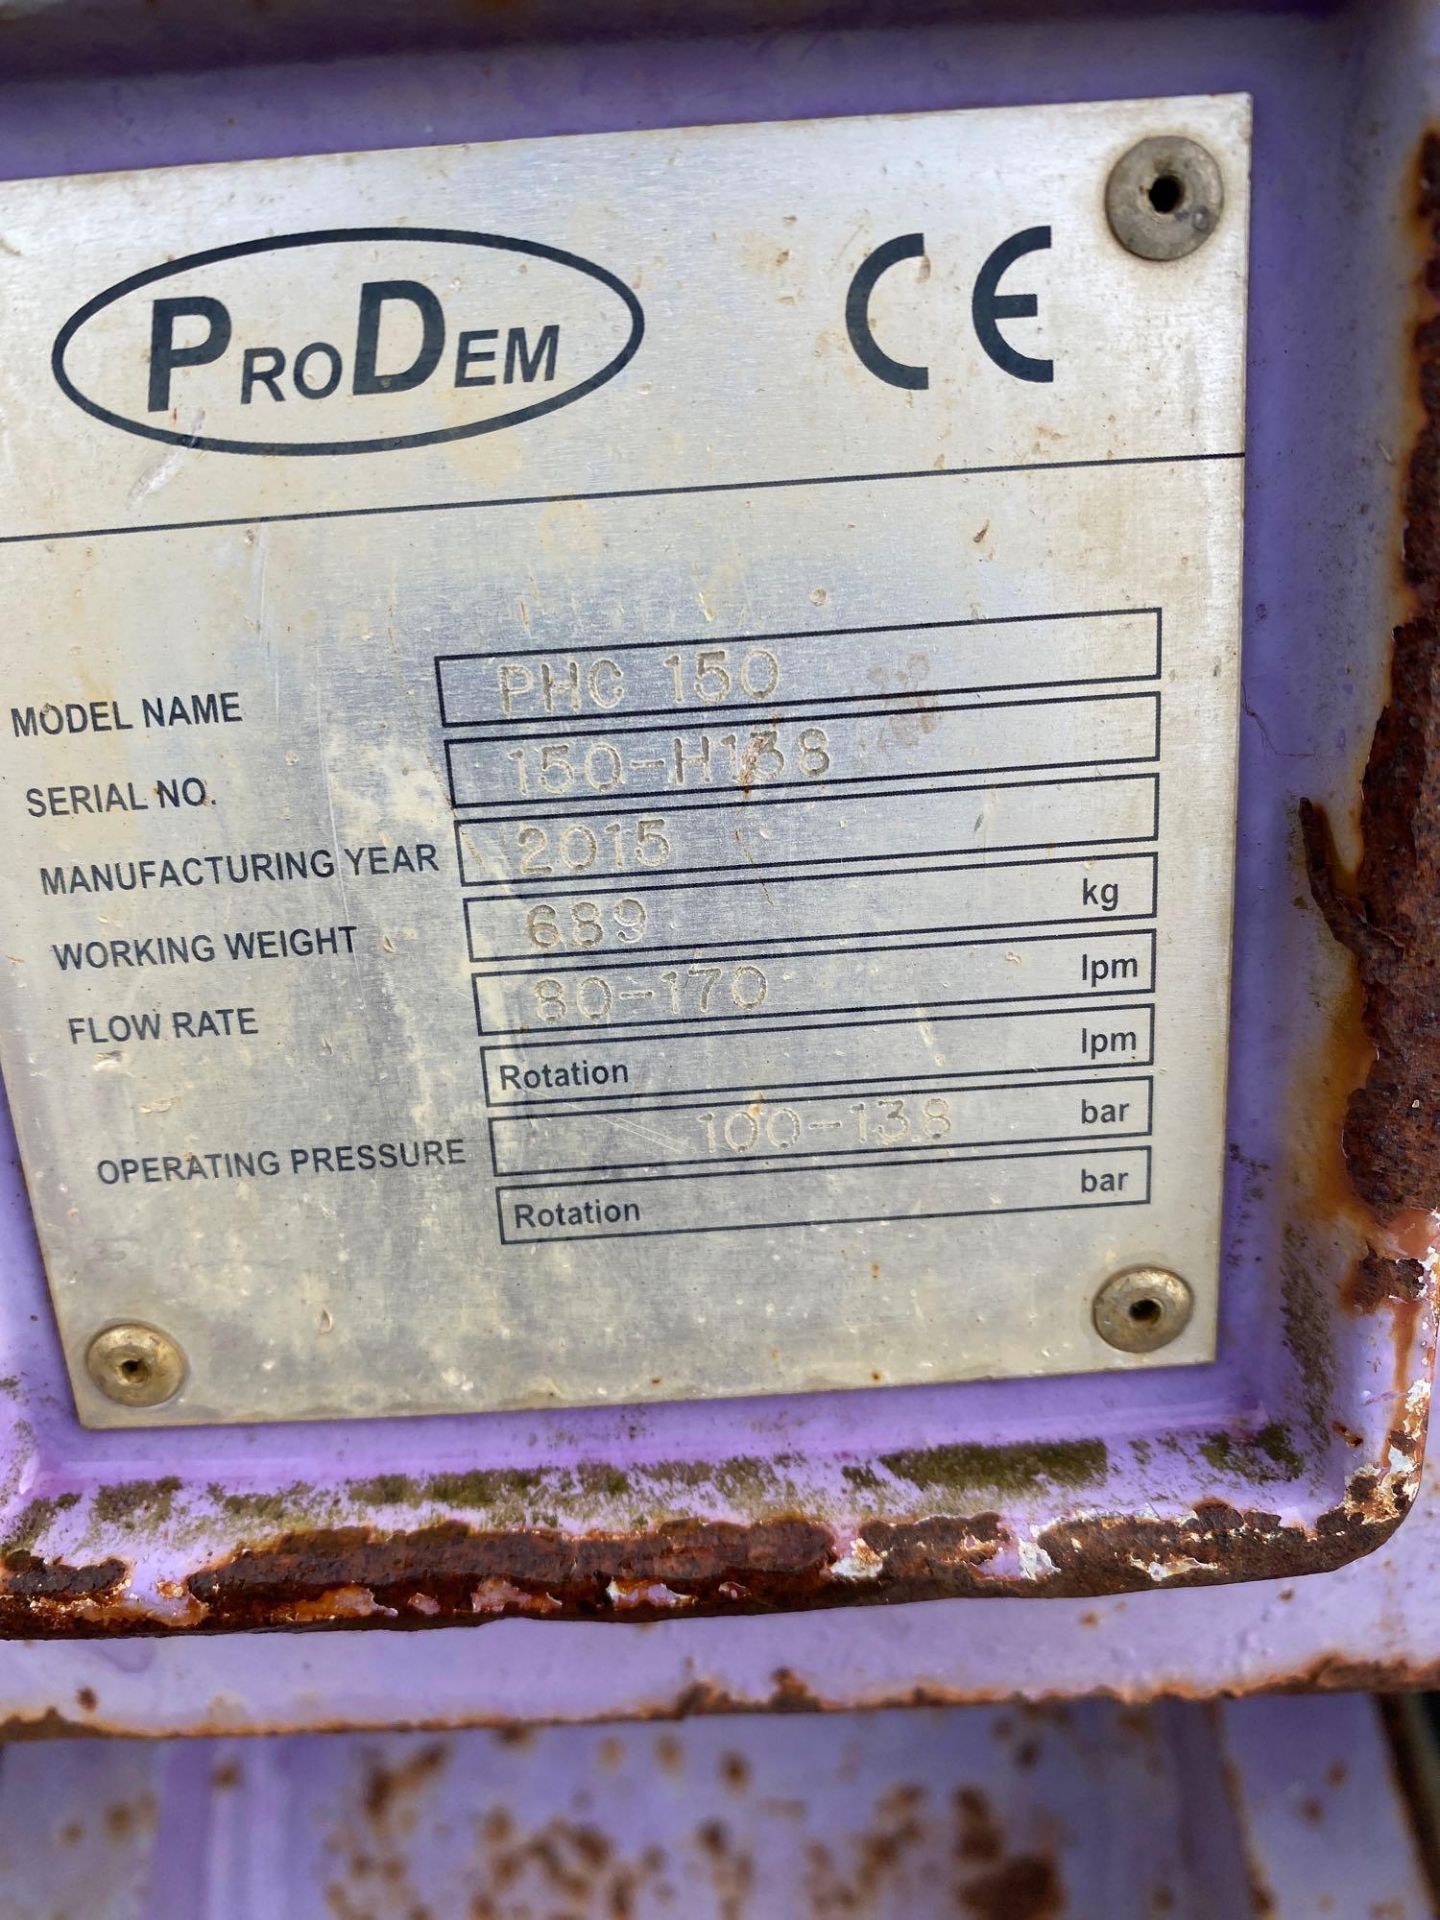 Pro Dem PHC150 excavator whacker plate date of manufacture 2015 - Image 4 of 6